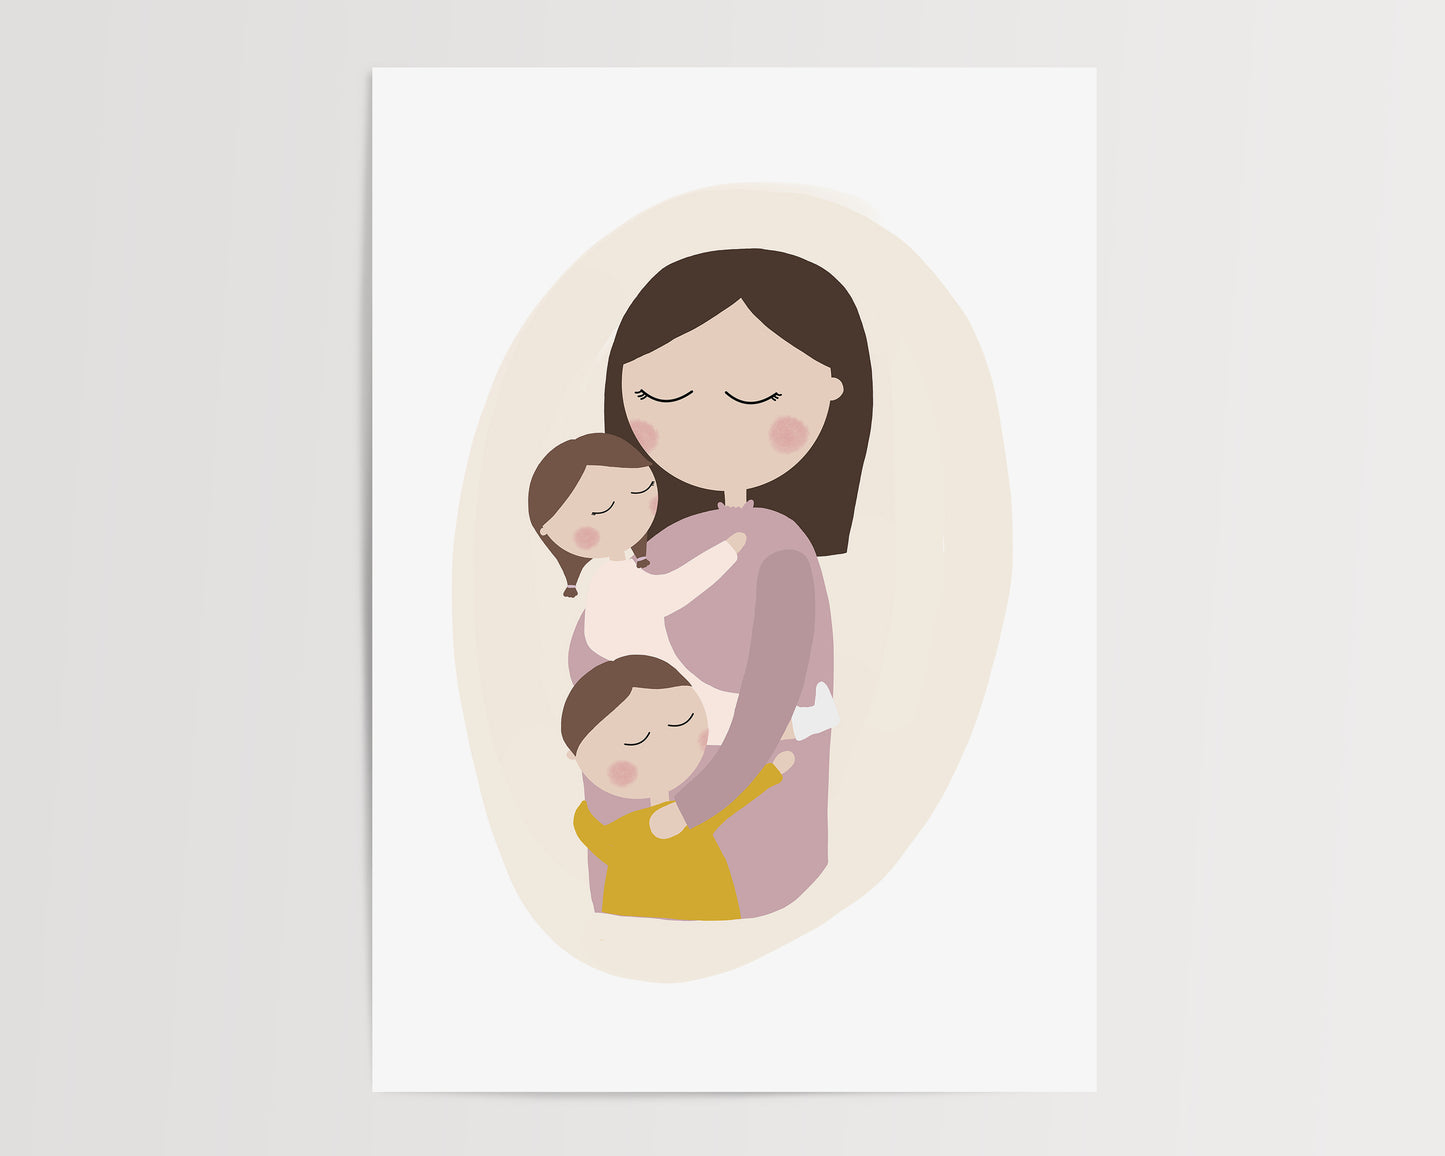 Mom And Two Kids Illustration by Jollie Bluebear